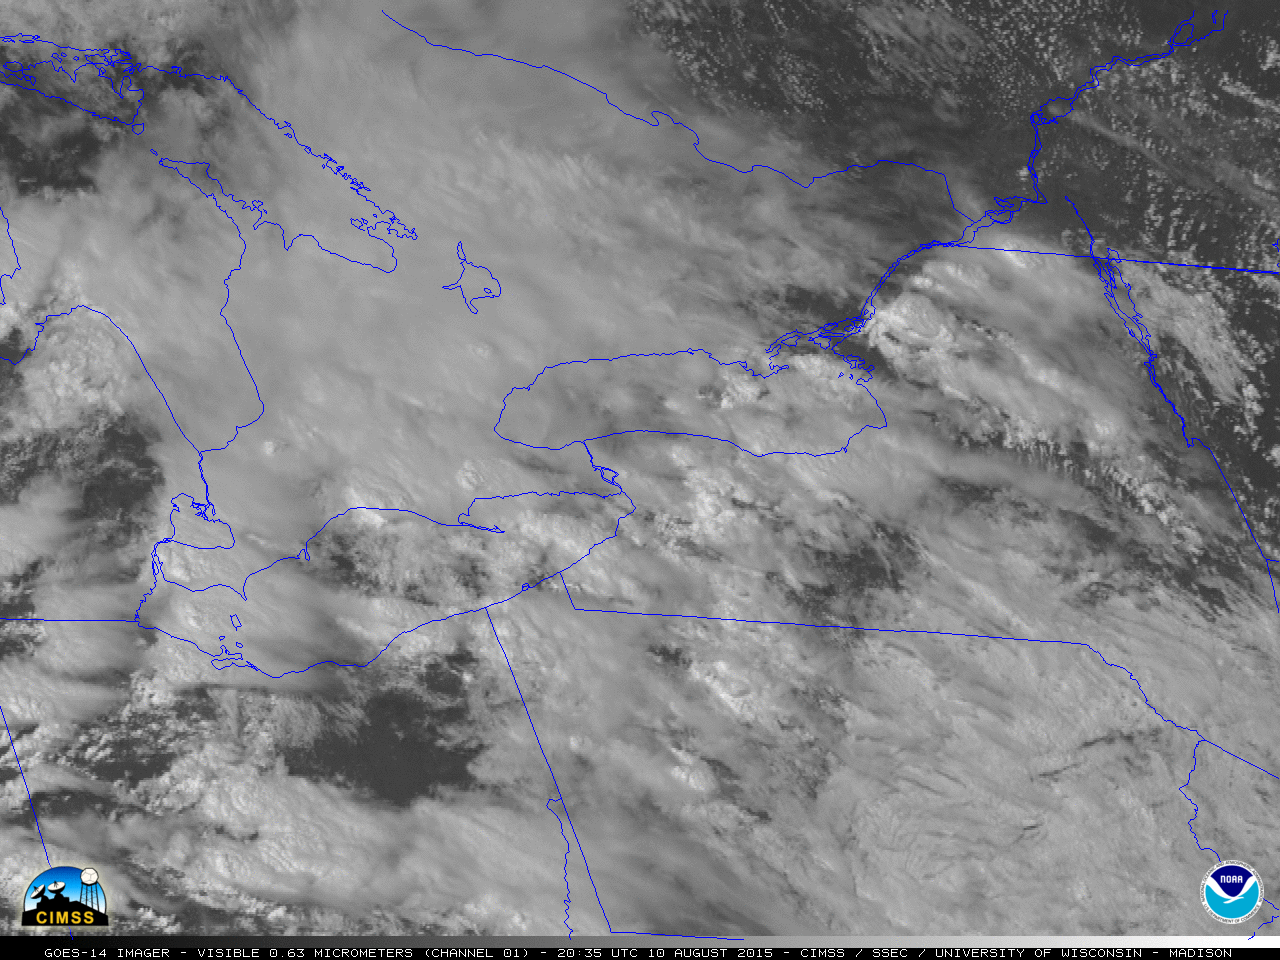 GOES-14 Visible (0.63 µm) images [click to play animation]